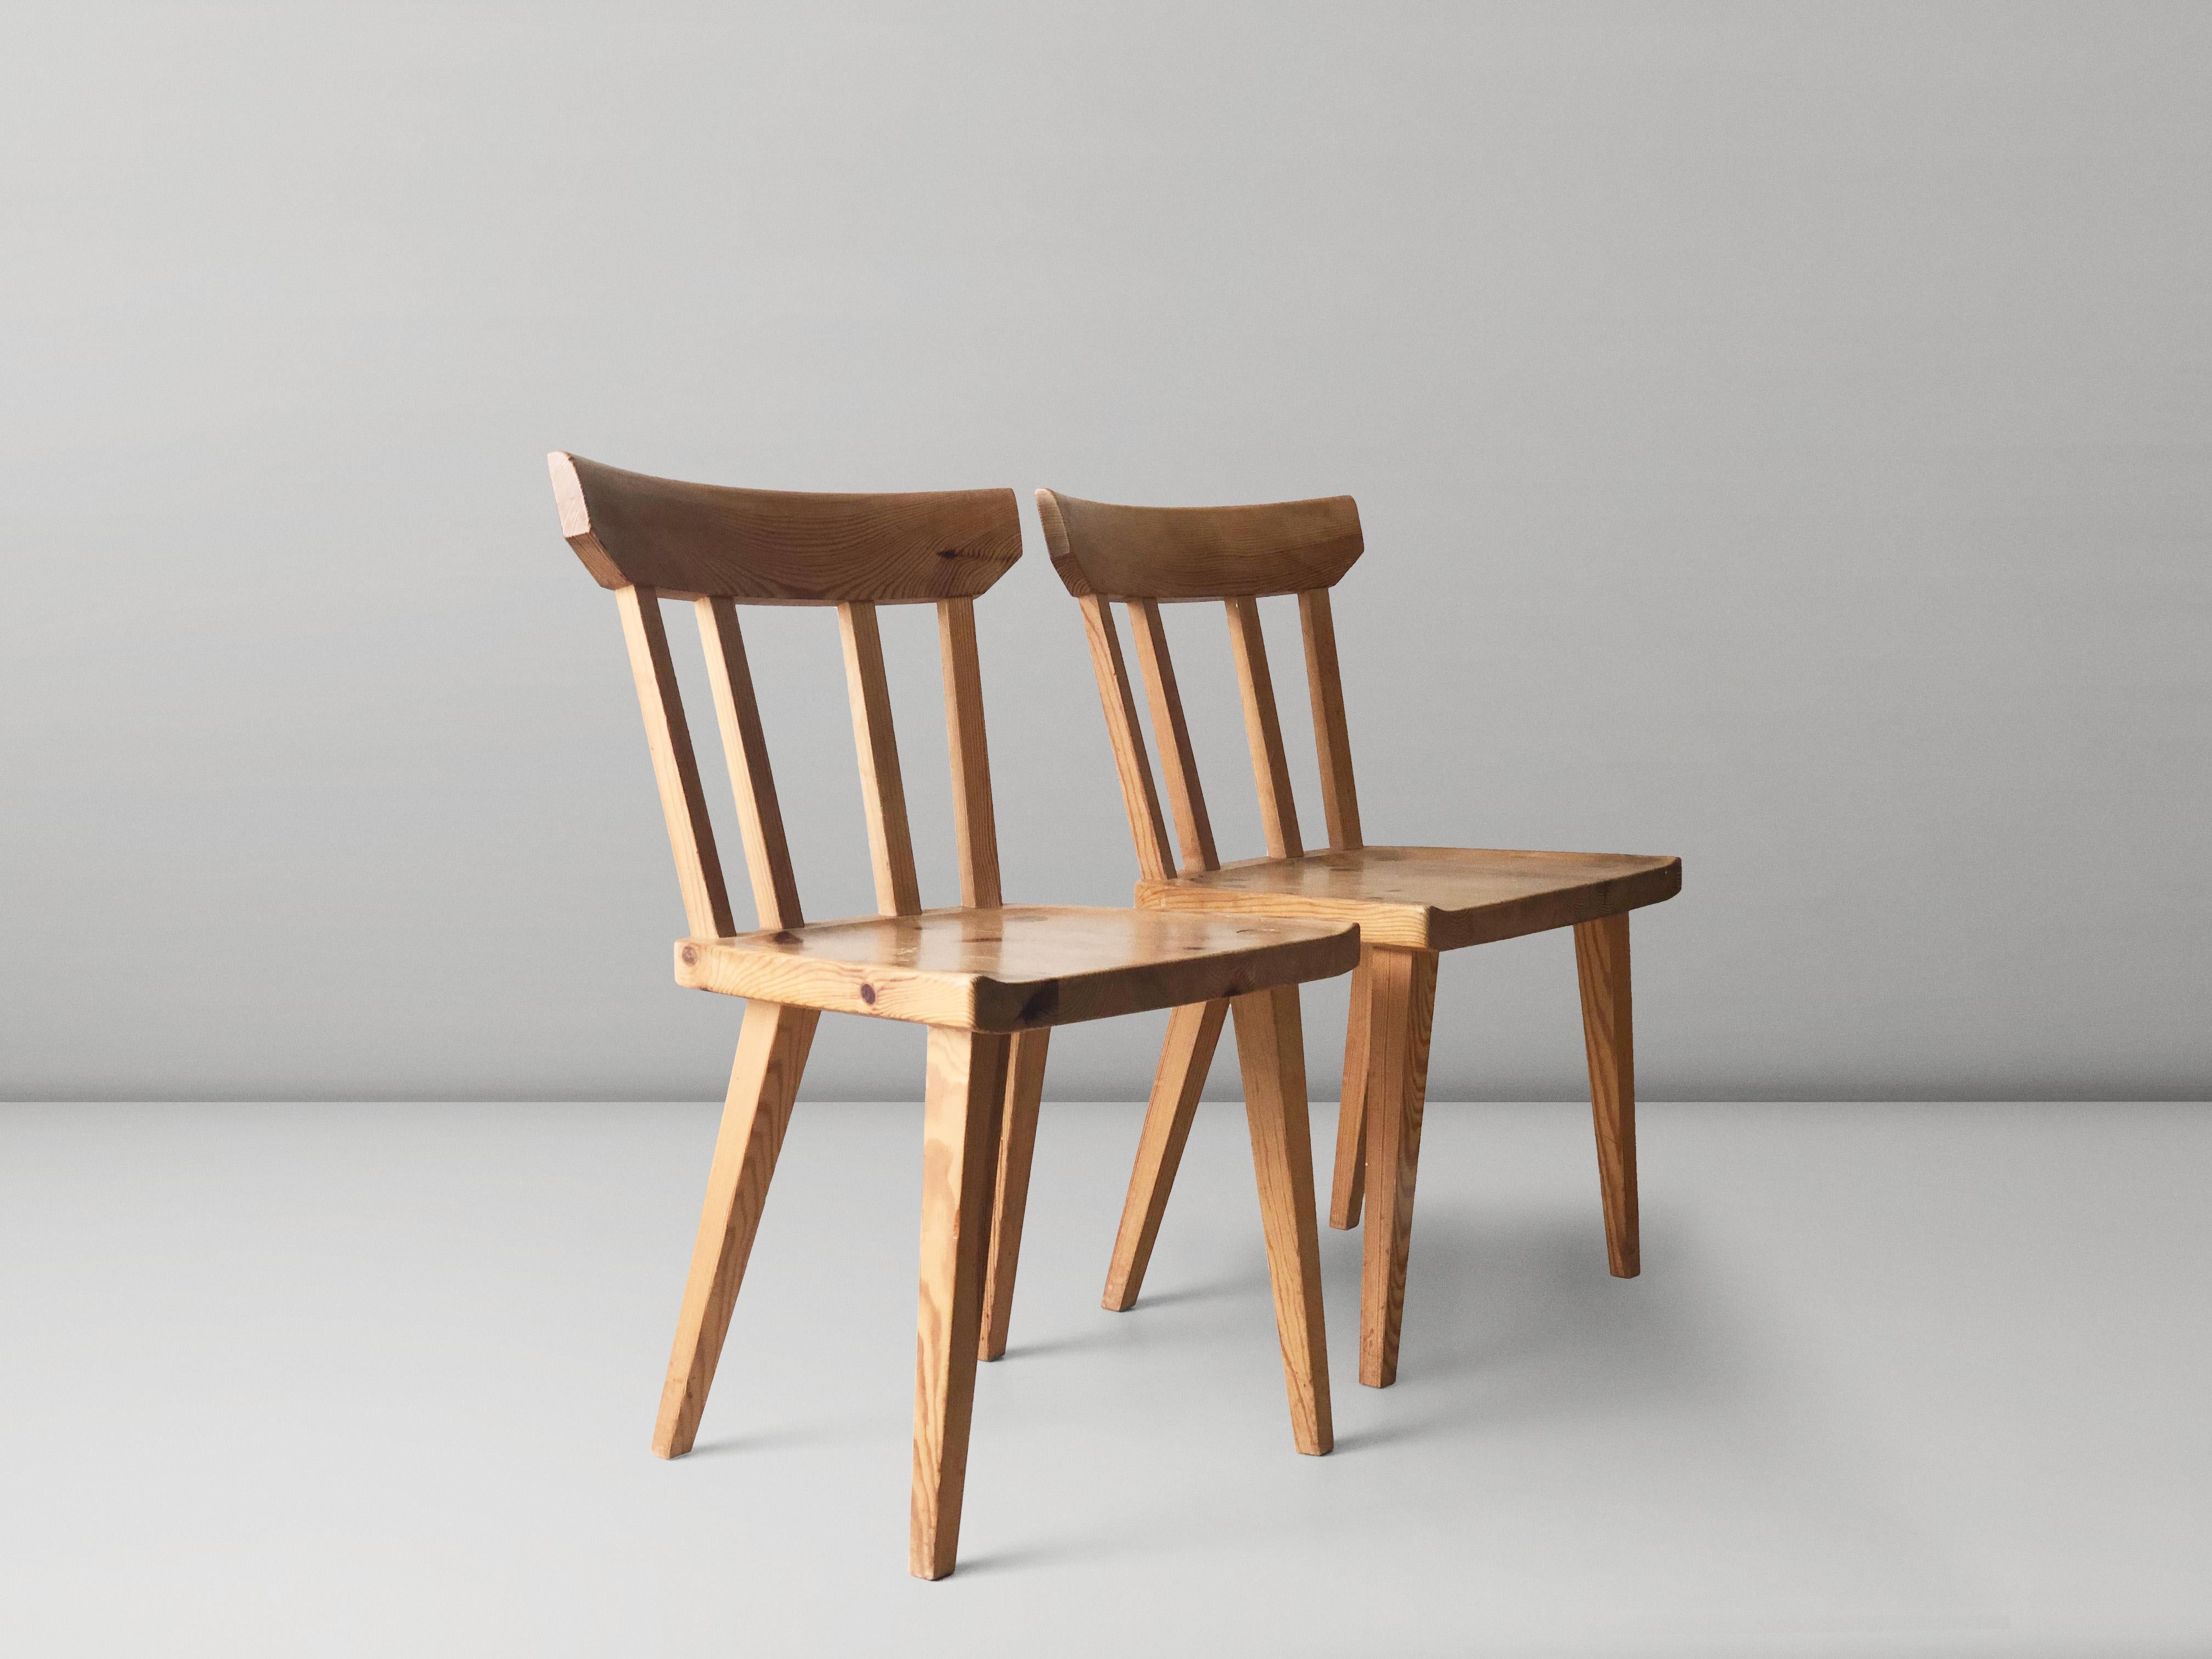 Carved Set of Two Göran Malmvall Swedish Pine Chairs for Karl Andersson & Söner